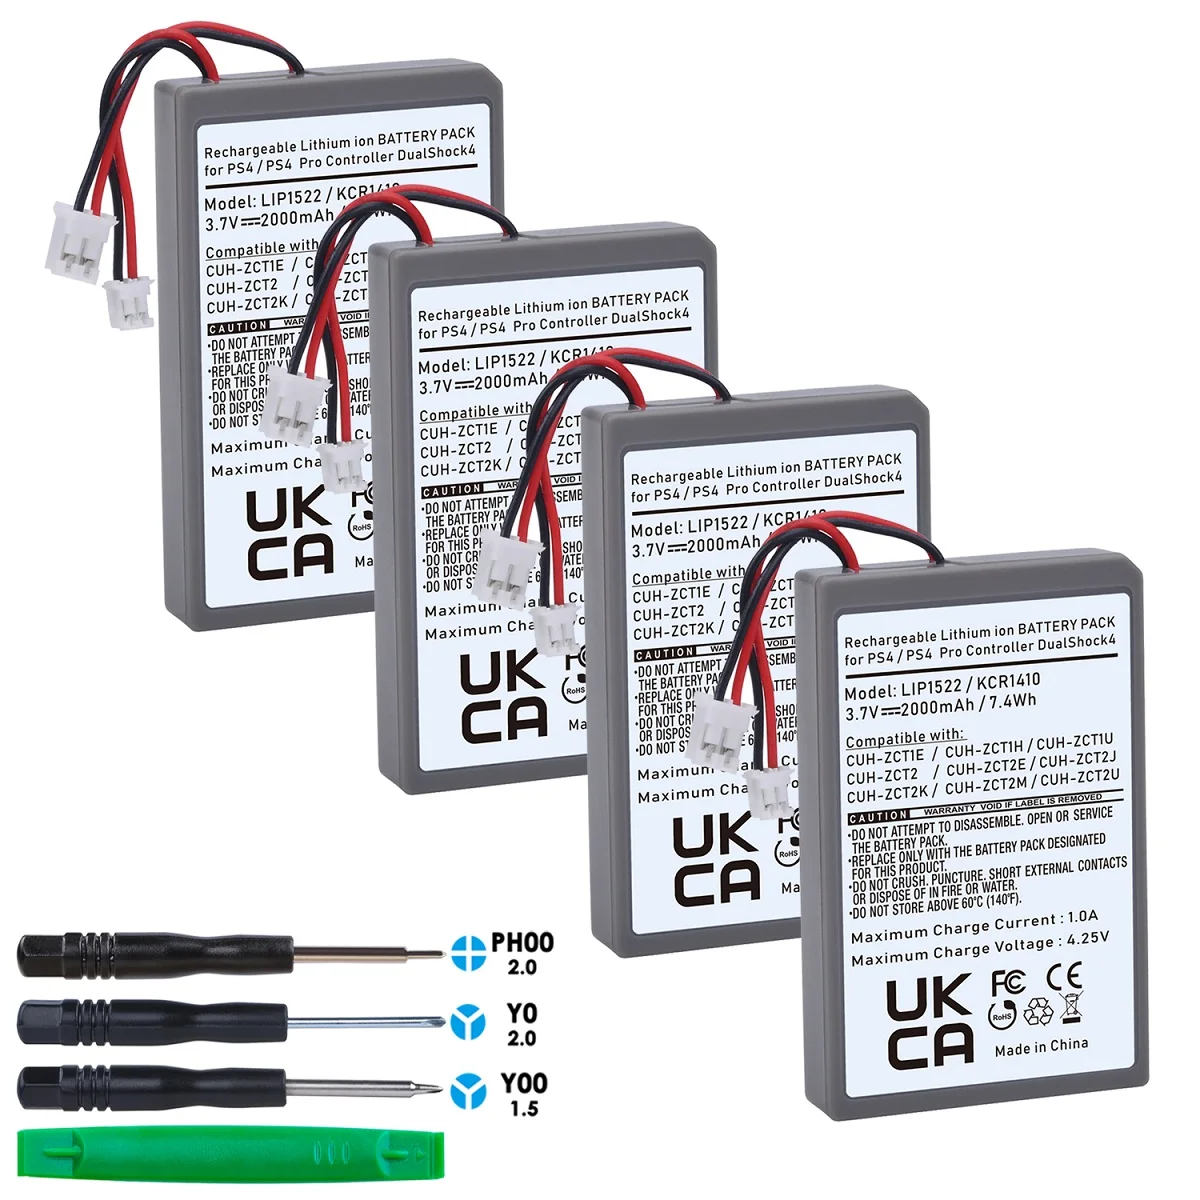 4 x Batteries For Sony PS4,PS4 Pro/Slim Gamepad Wireless controller CUH-ZCT1E CUH-ZCT1U CUH-ZCT2 or CUH-ZCT2U Replace battery